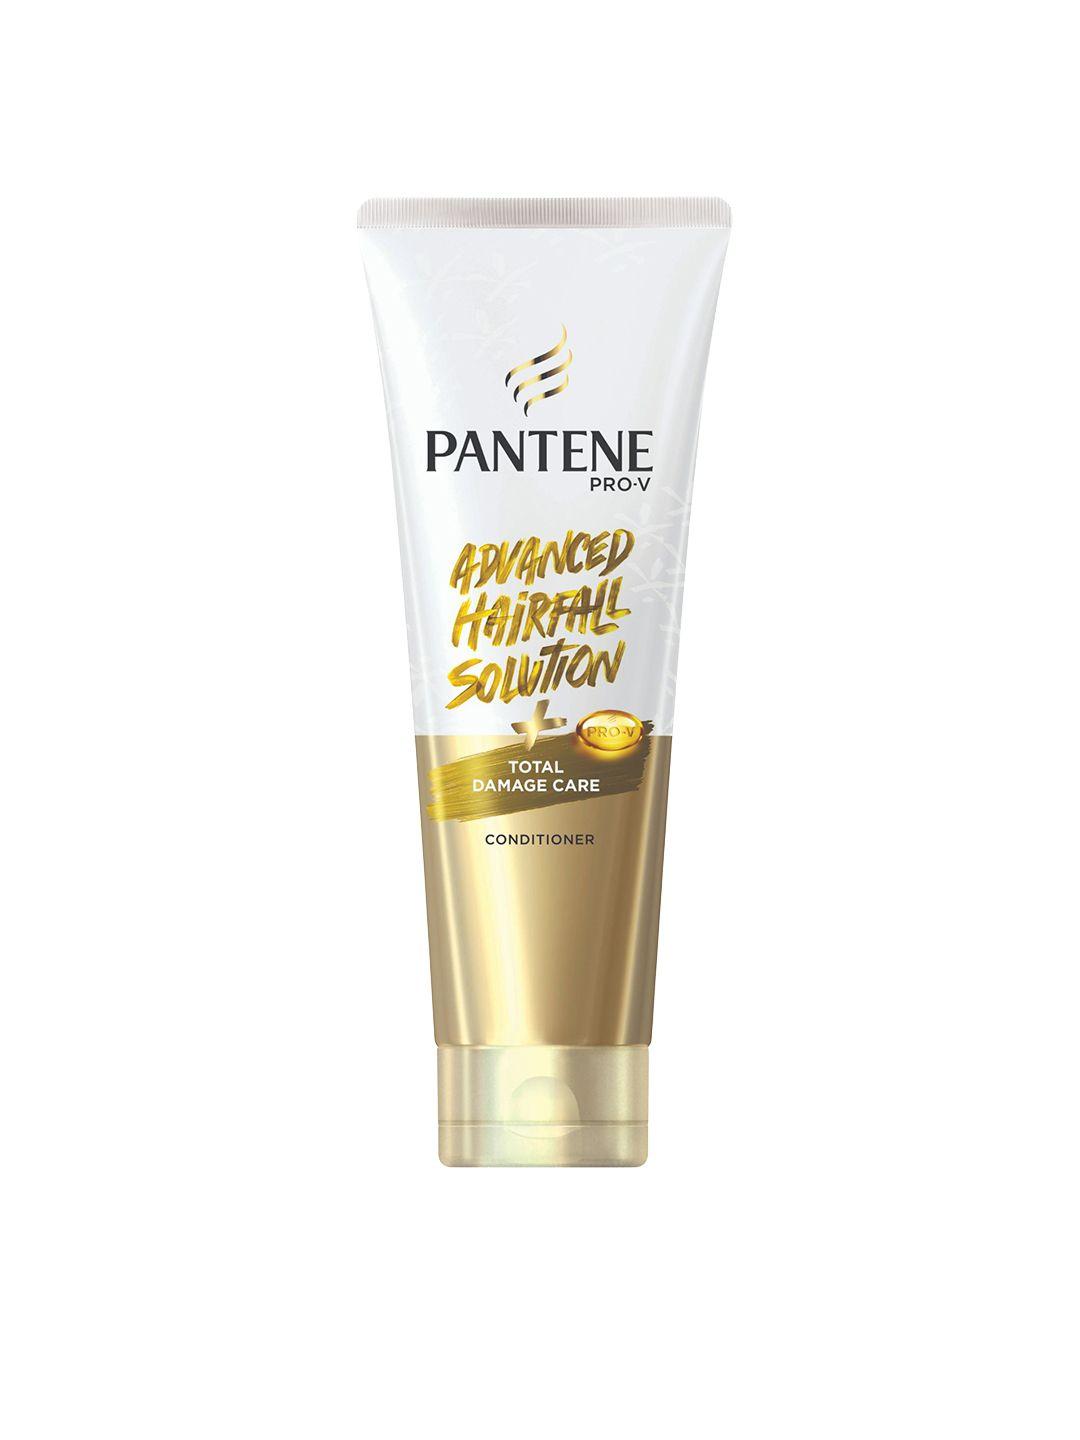 pantene unisex advanced hair fall solution total damage care conditioner-200 ml